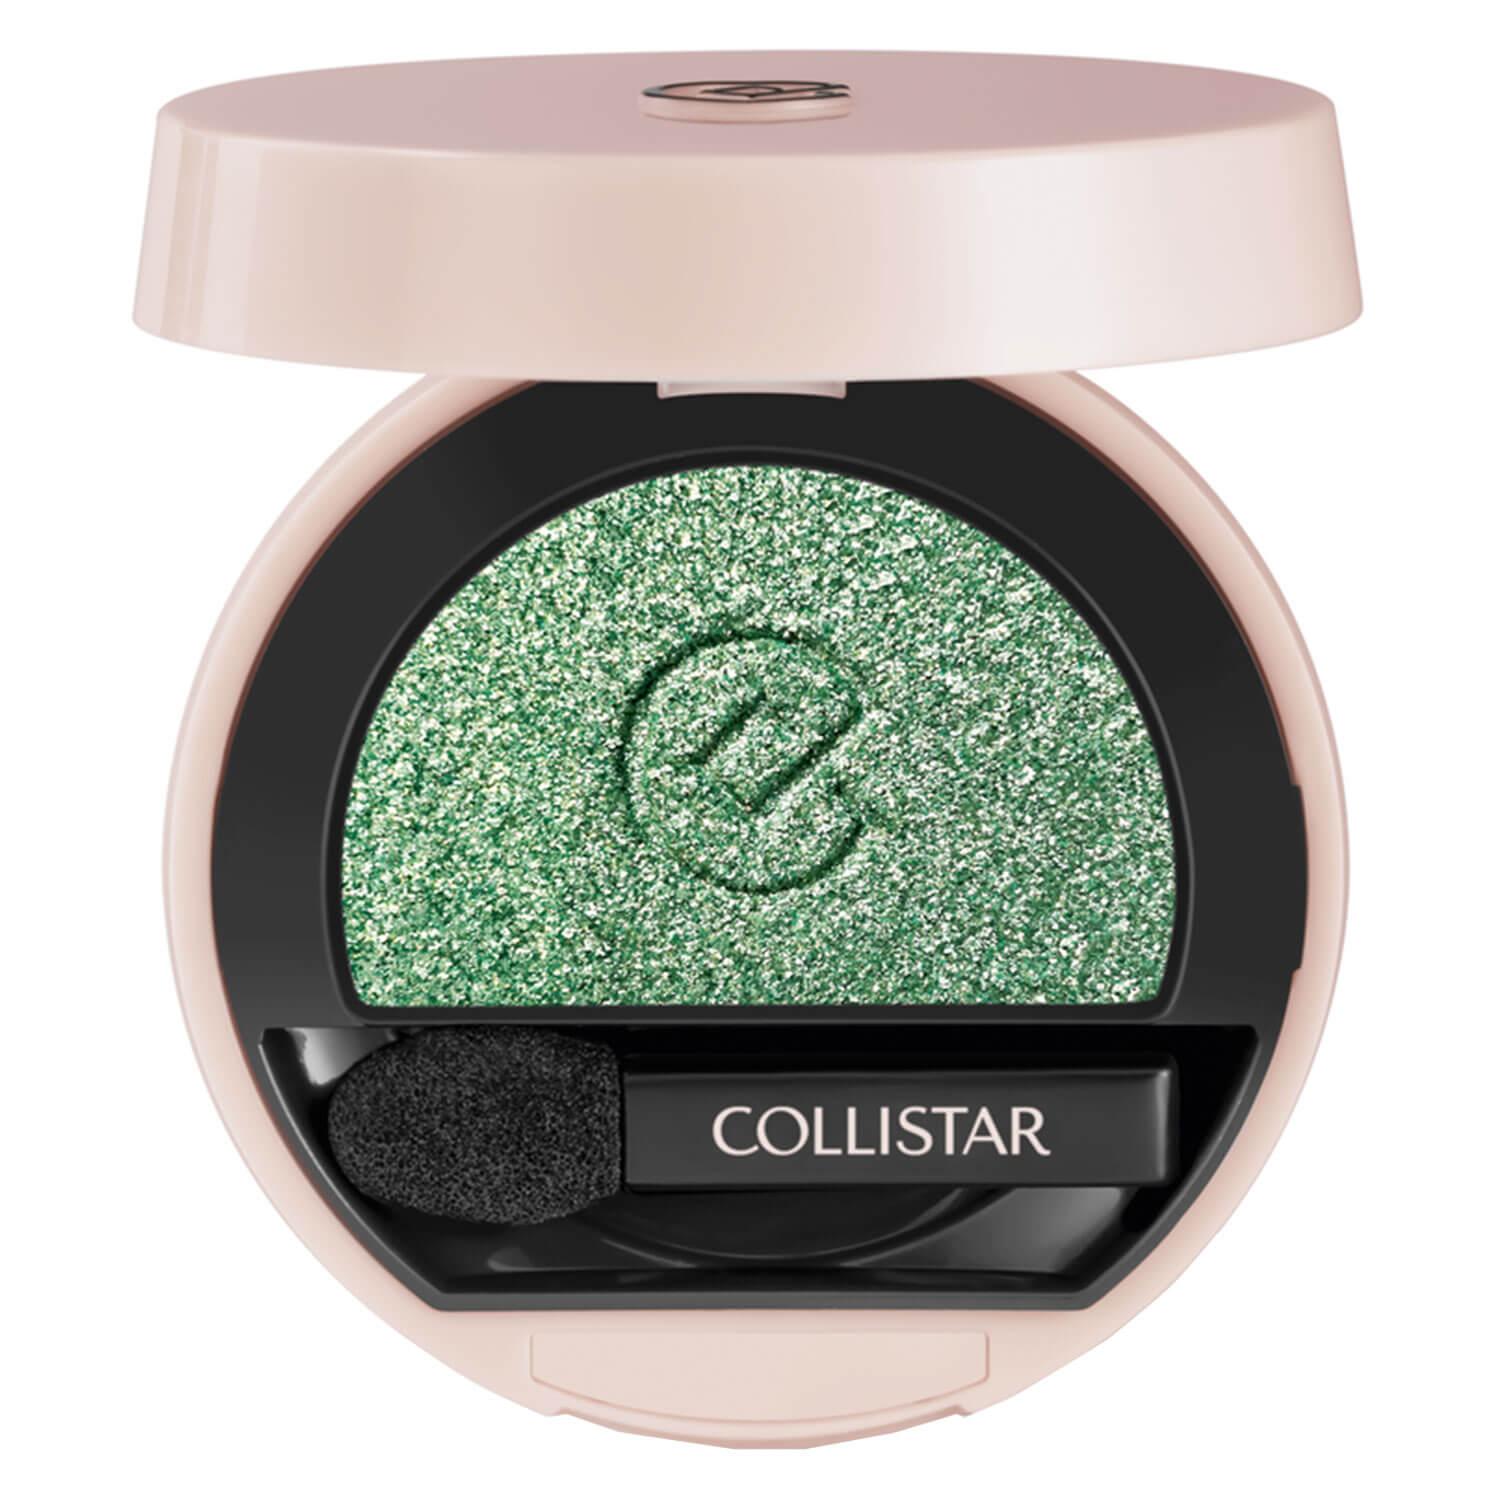 Impeccable - Compact Eye Shadow 330 Verde Capri Frost